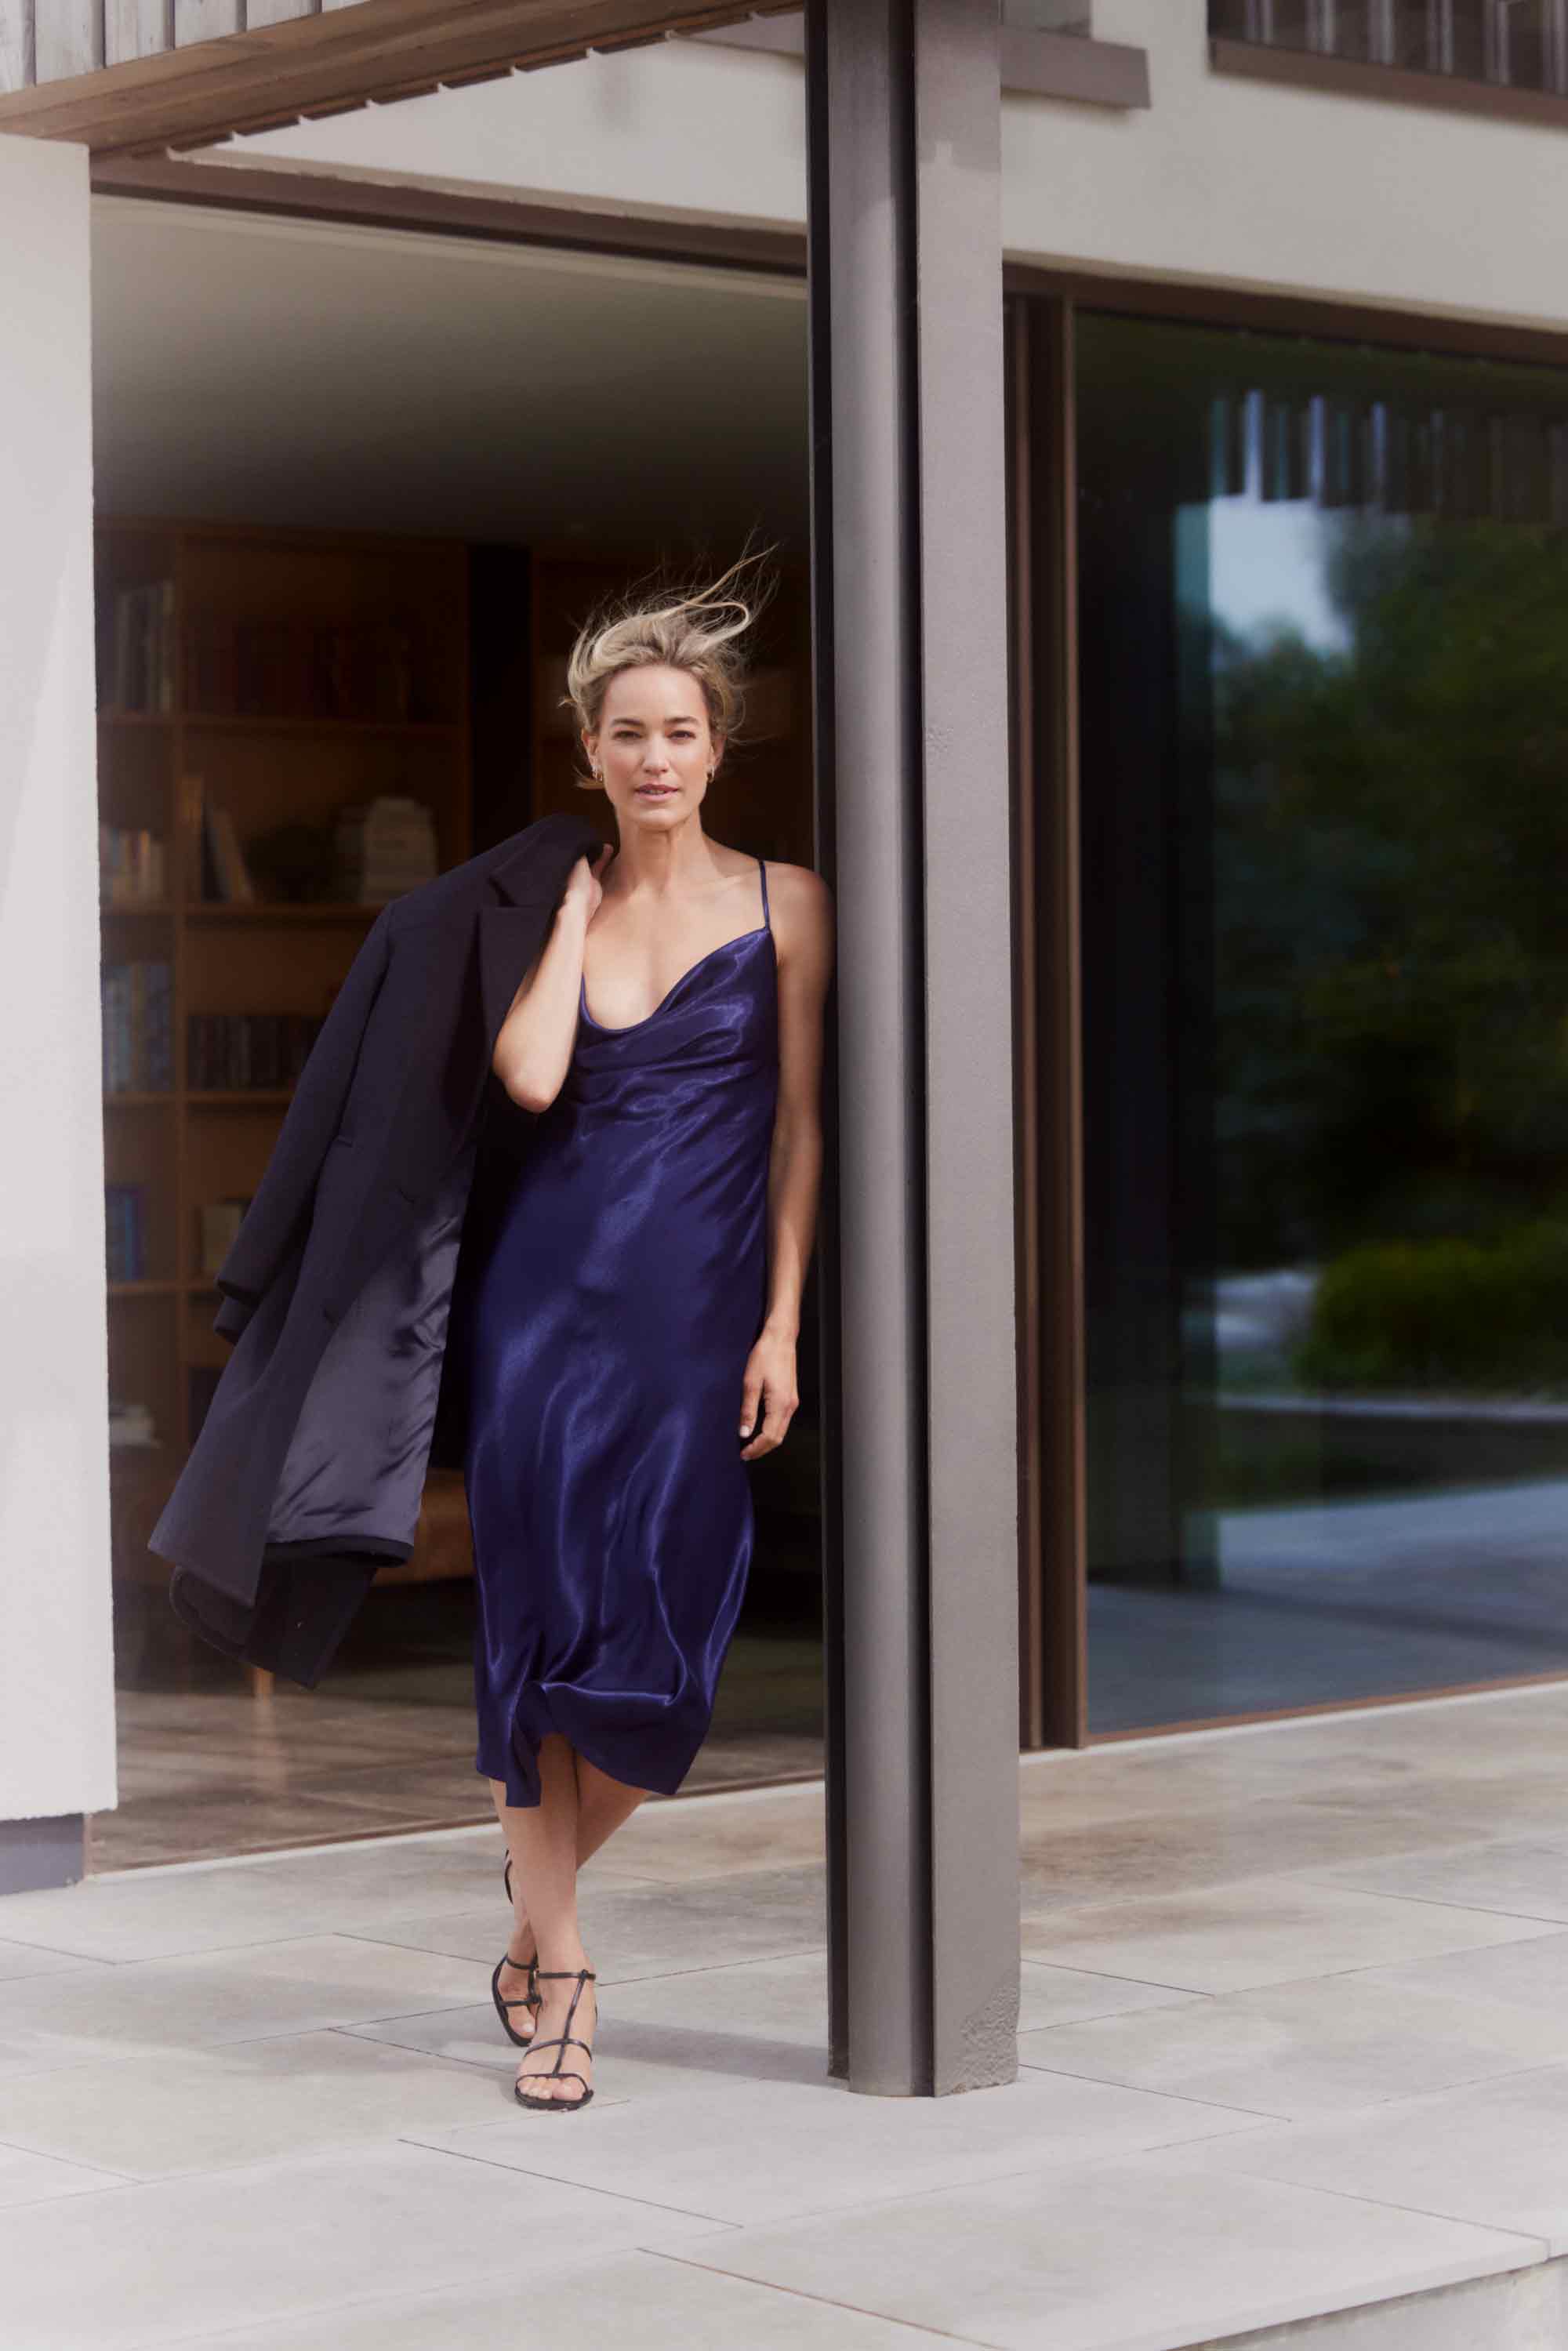 Chic and Timeless Dresses by Vivere London